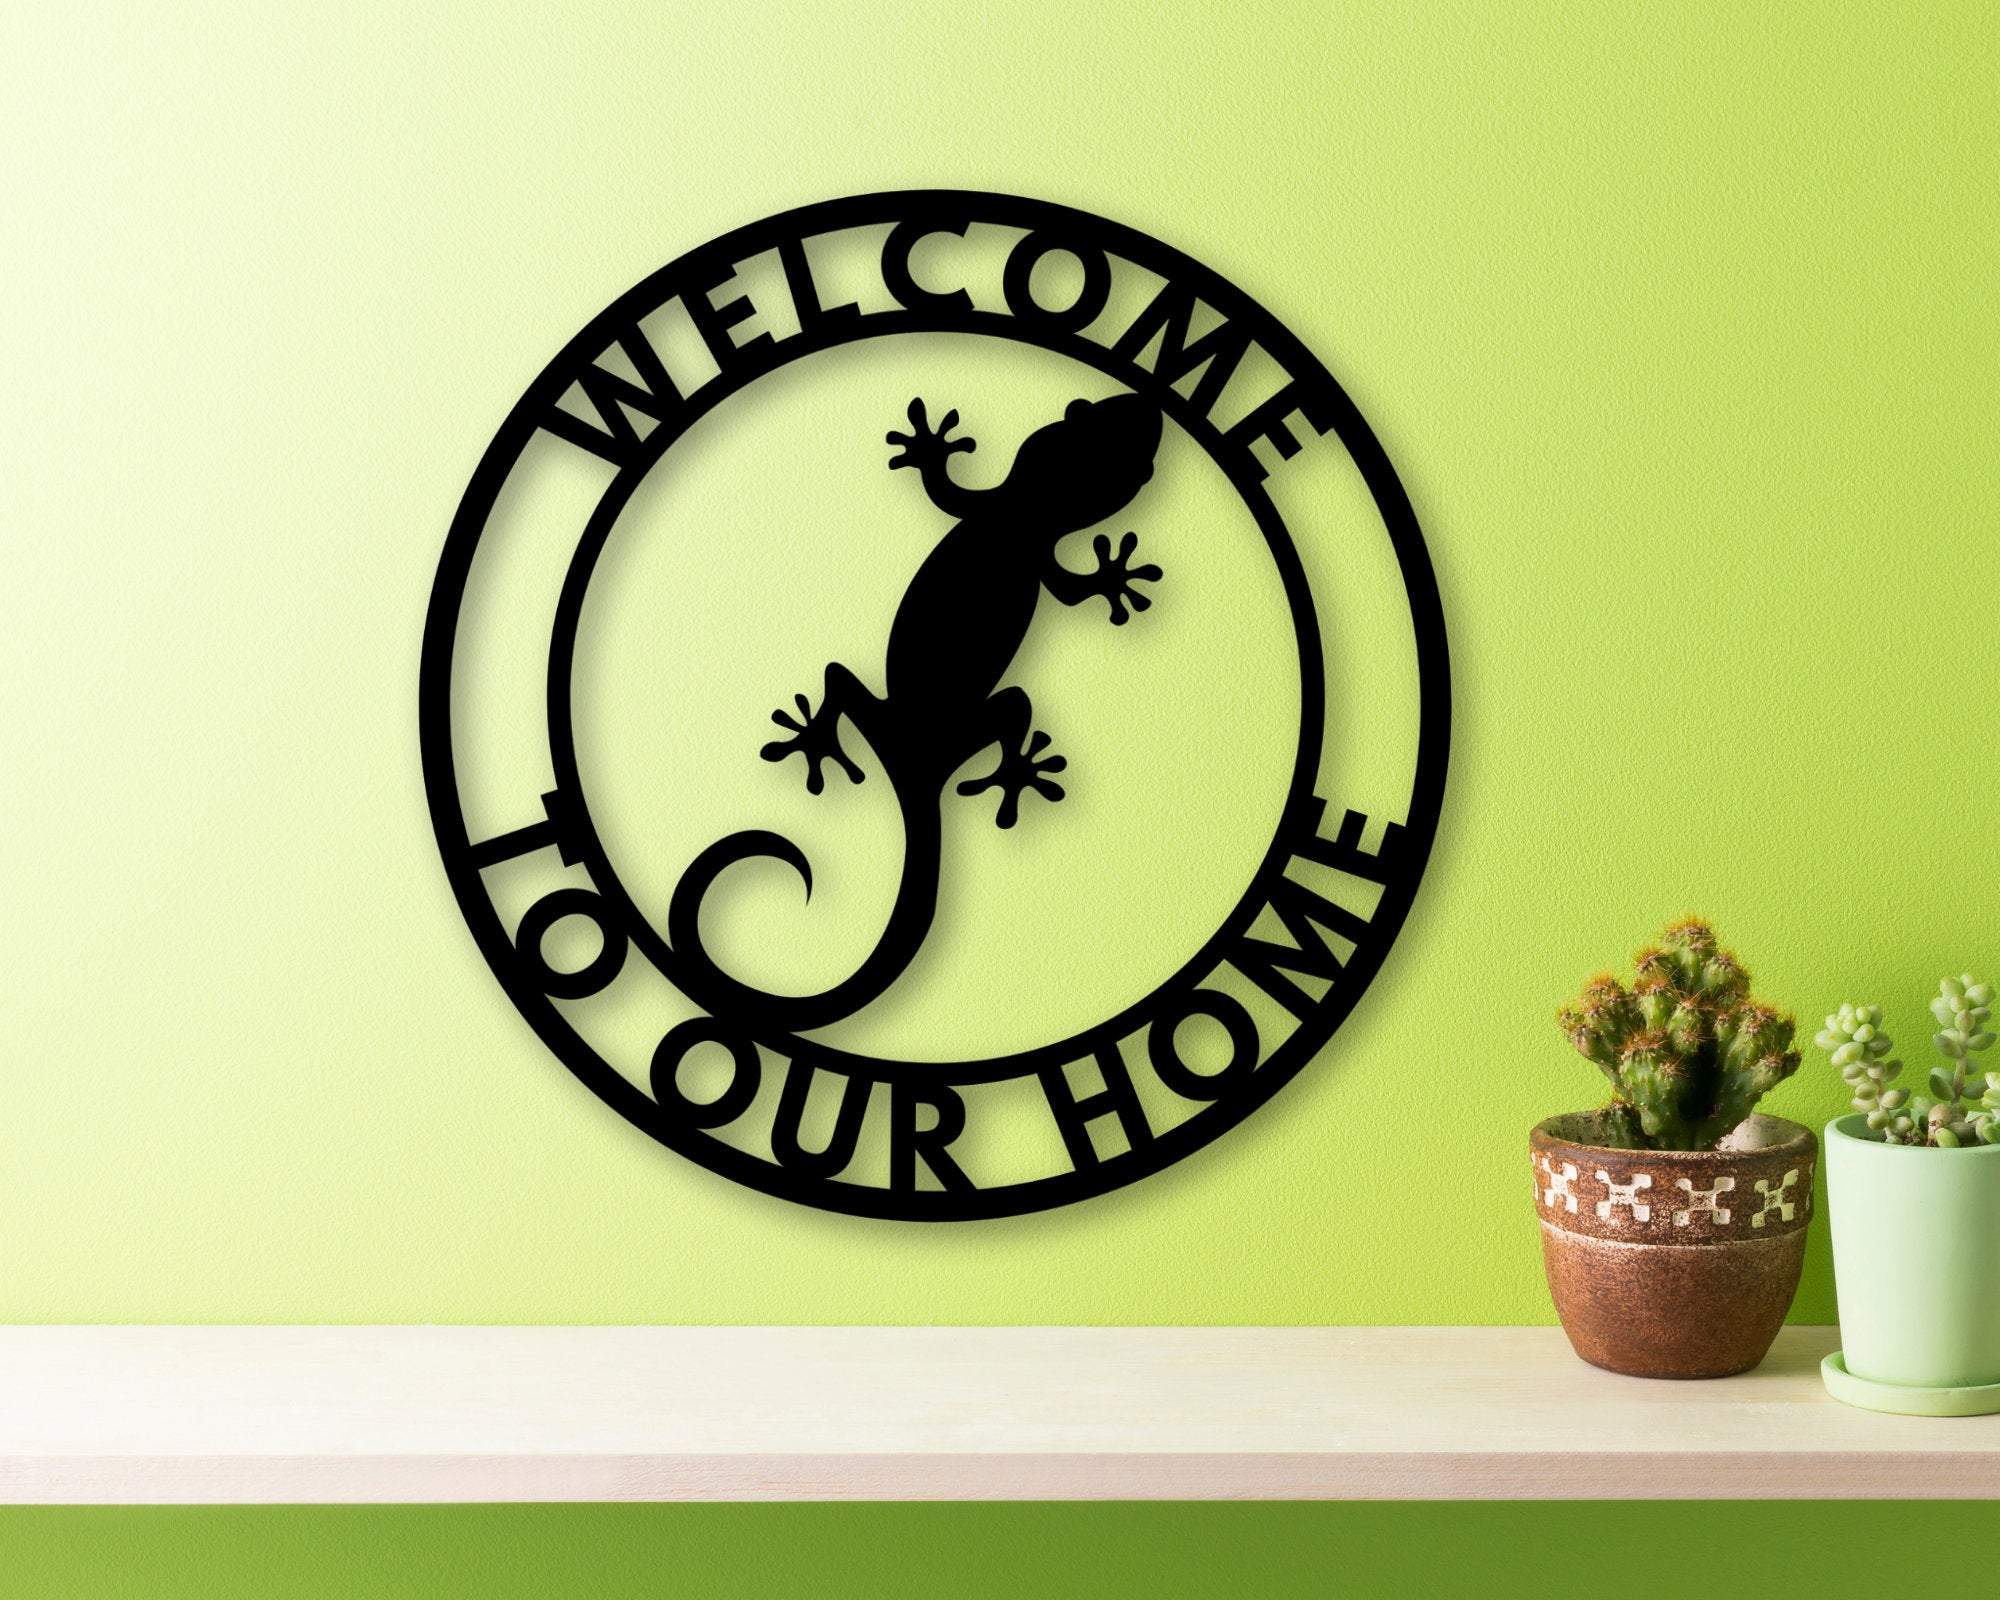 Personalized Gecko Sign, Grandma Gift, Last Name Sign, Name Plaque, House Numbers, Dad Gift, Welcome Sign, Family Name, Custom Family Gift